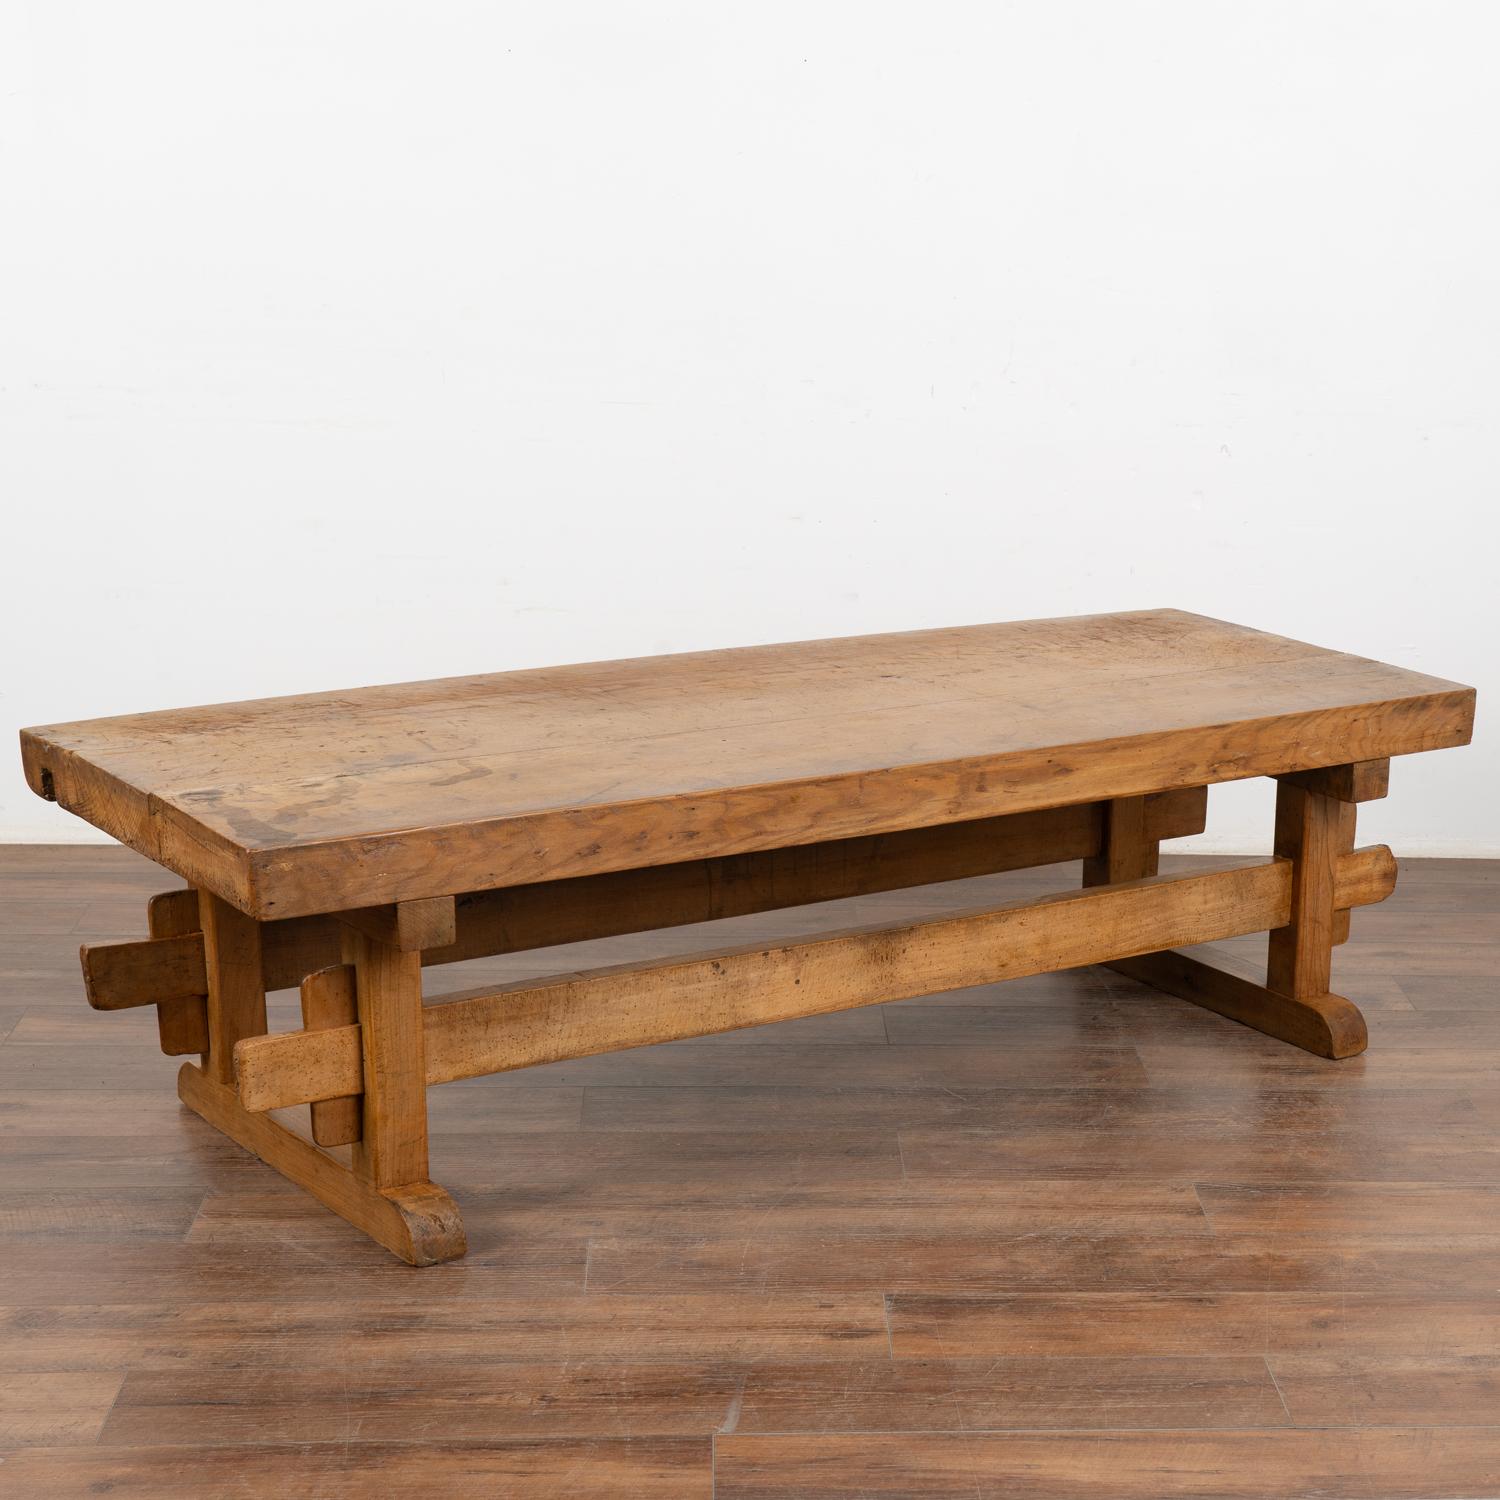 Rustic 6' farmhouse coffee table with trestle style base and loaded with vintage character.
The thick plank wood top is covered in scrapes, deep gouges, stains and old cracks acquired with 100 years of use as a work table.
Restored and waxed, this